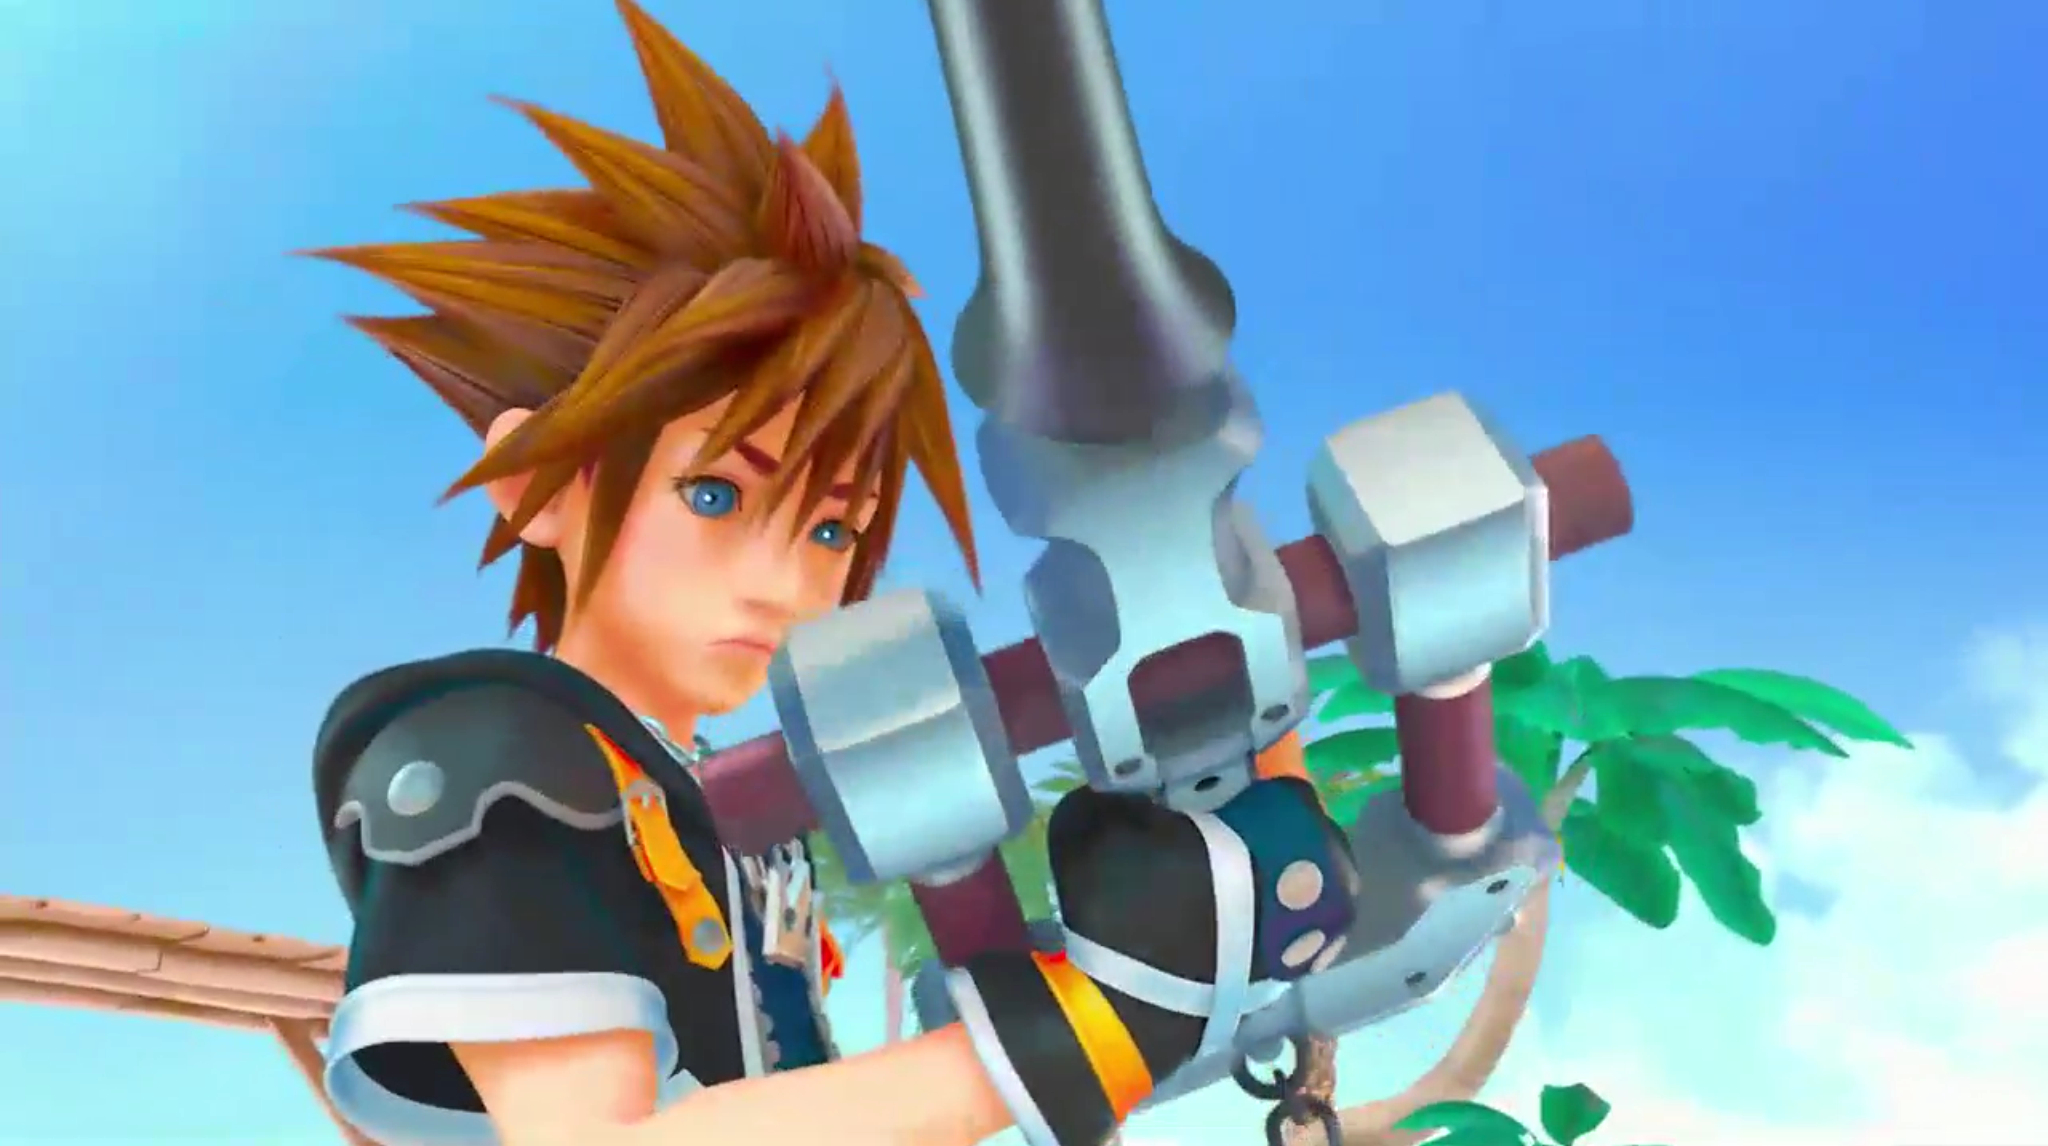 What we know about ‘kingdom hearts iii’ so far